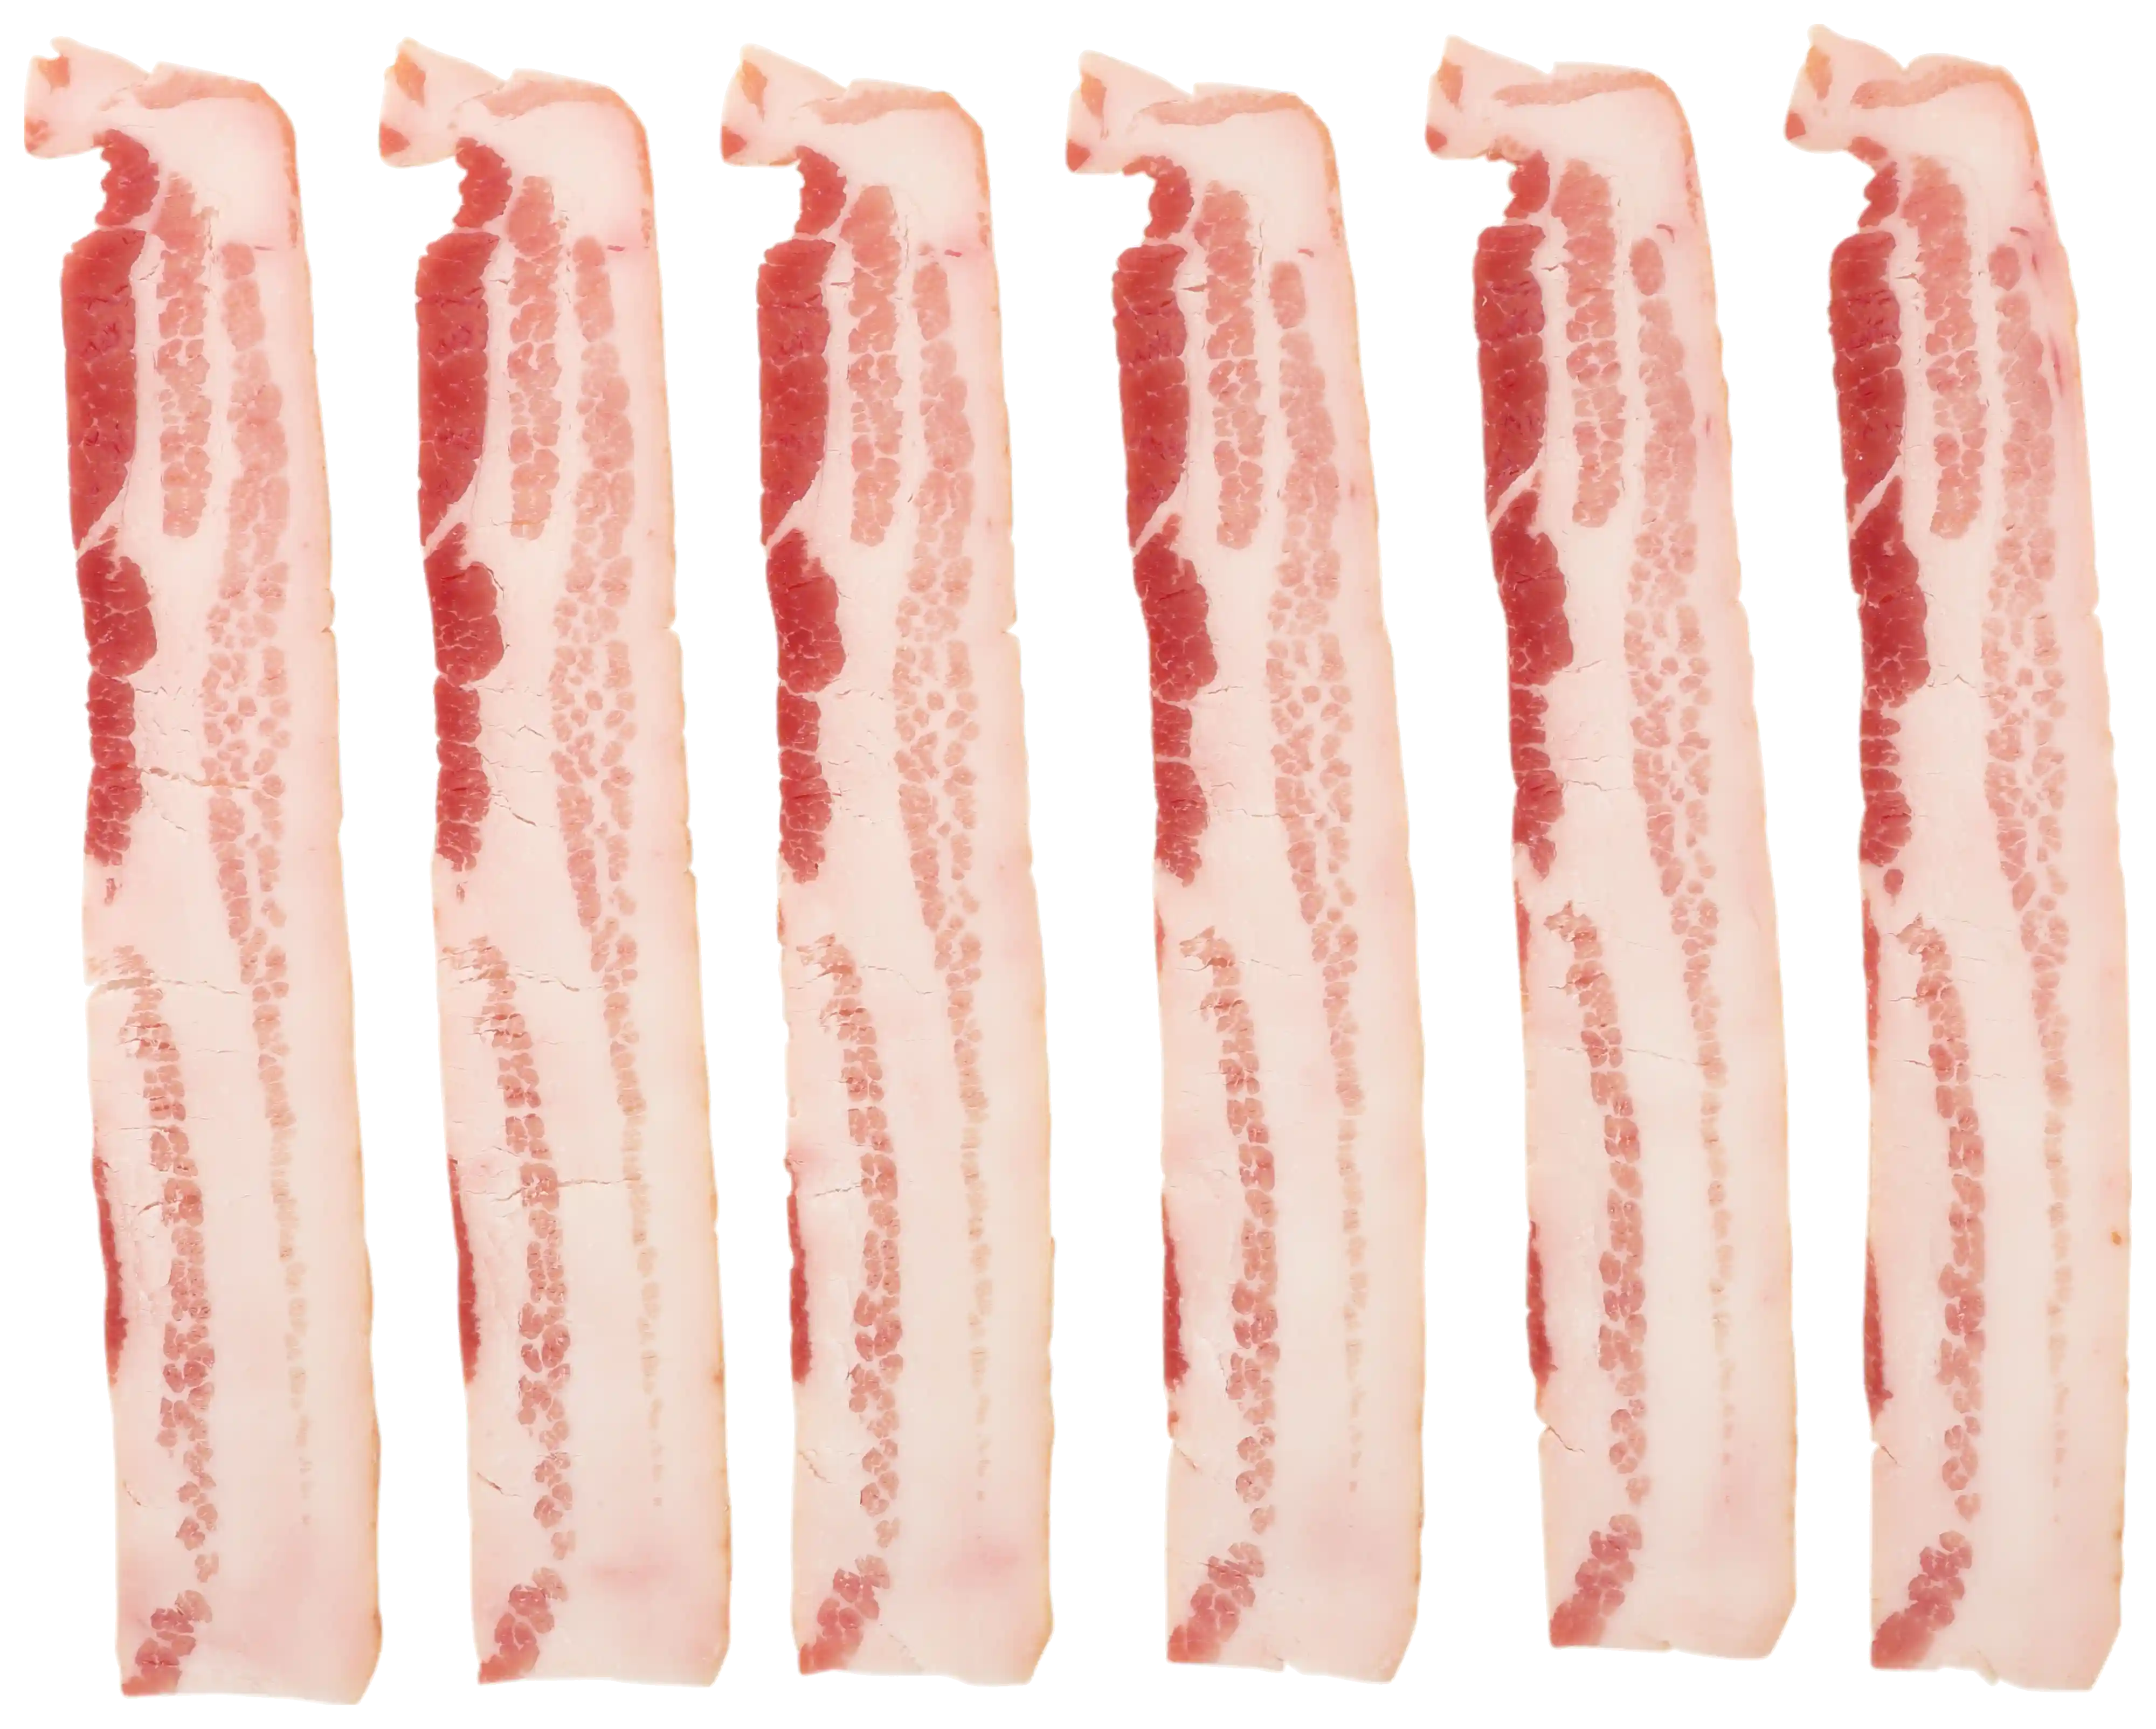 Wright® Brand Naturally Hickory Smoked Regular Sliced Bacon, Bulk, 30 Lbs, 14-18 Slices per Pound, Frozen_image_21